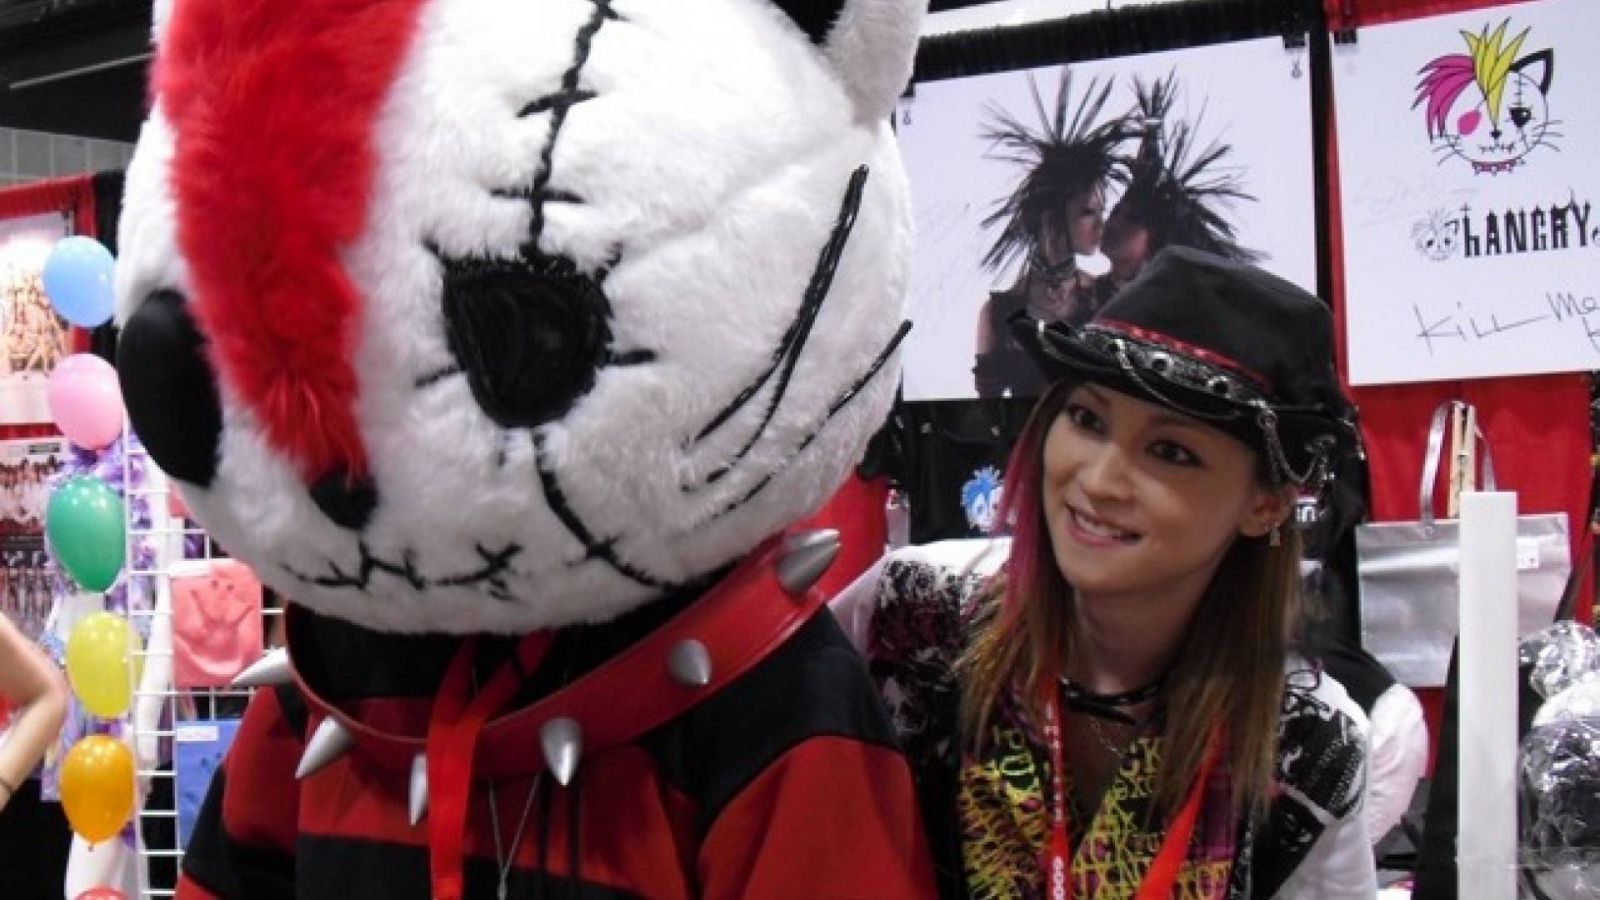 Interview mit HANGRY auf der Anime Expo © HANGRY&ANGRY - JaME